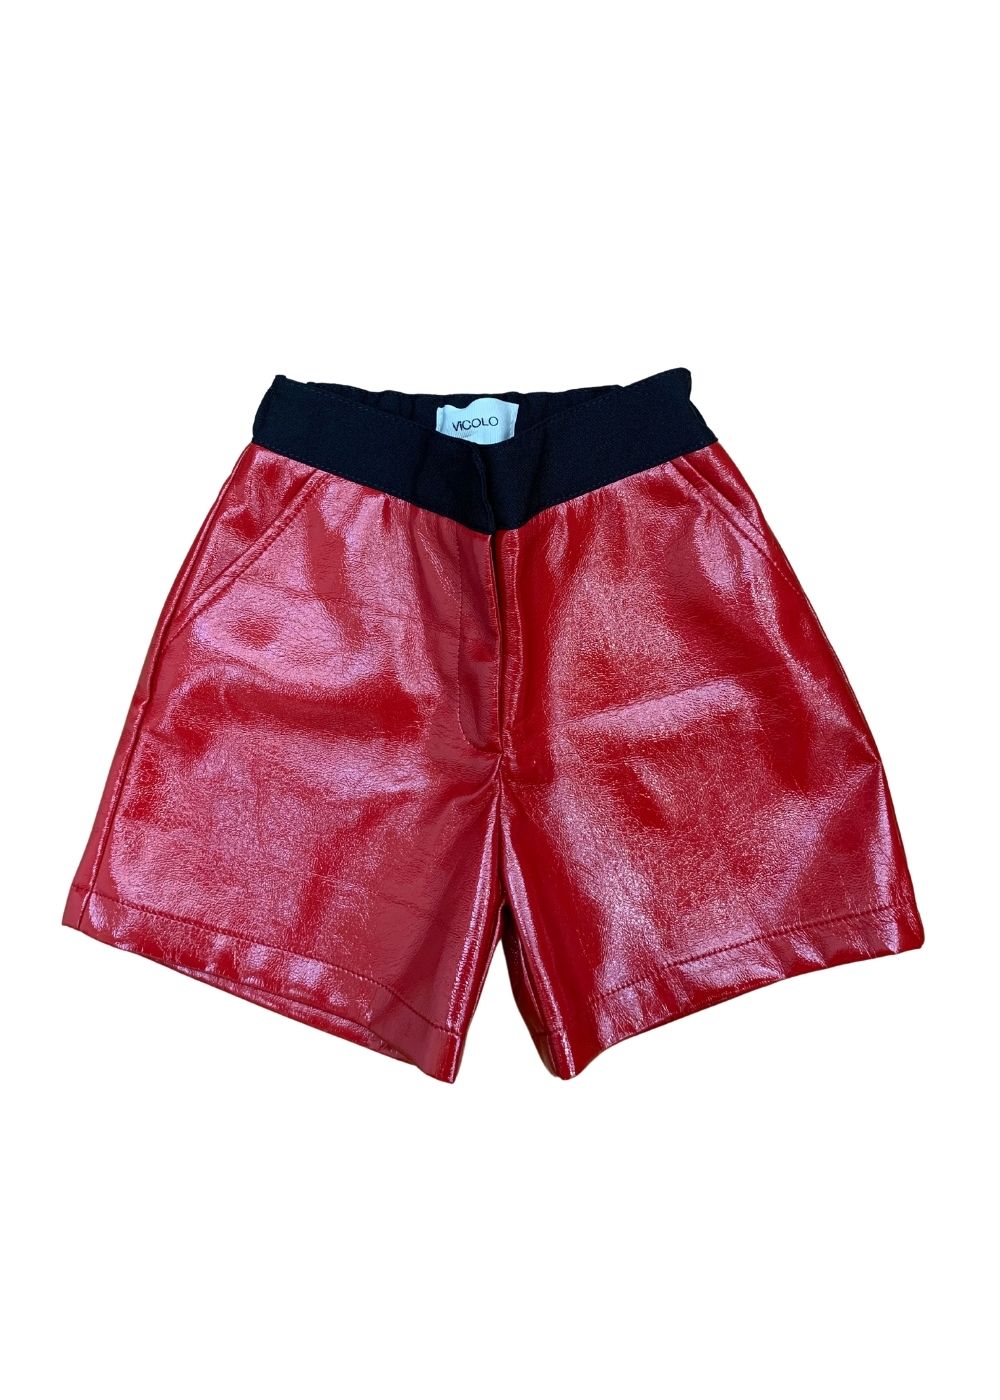 Featured image for “Vicolo shorts in vinile”